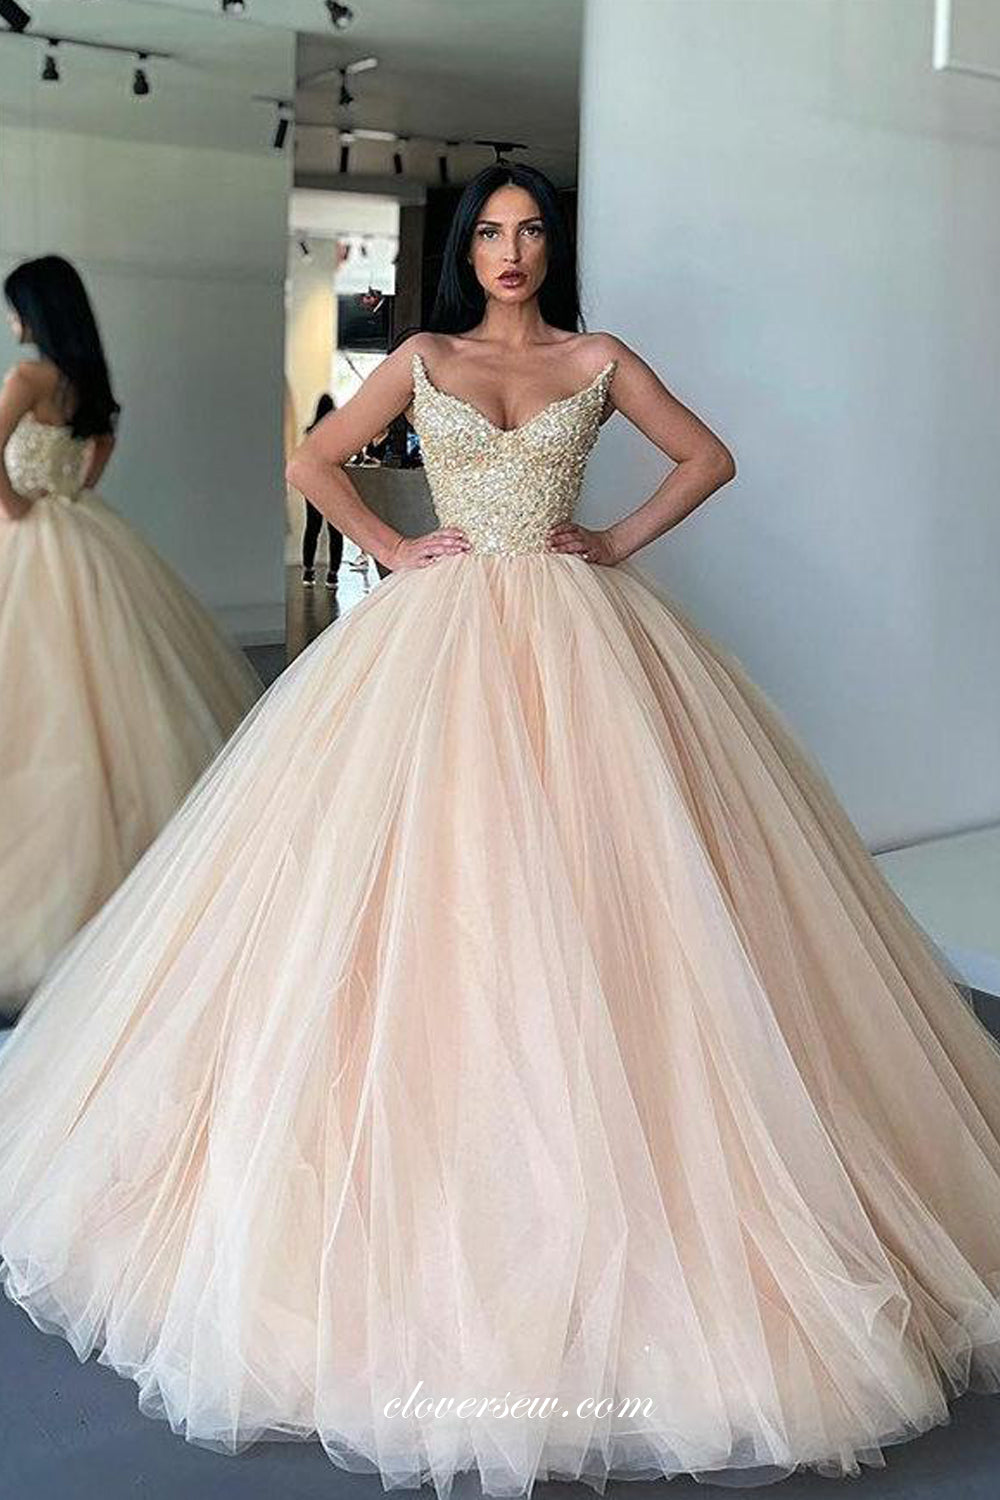 Gorgeous Beaded Strapless Champagne Tulle Ball Gown Princess Dresses, CP0761